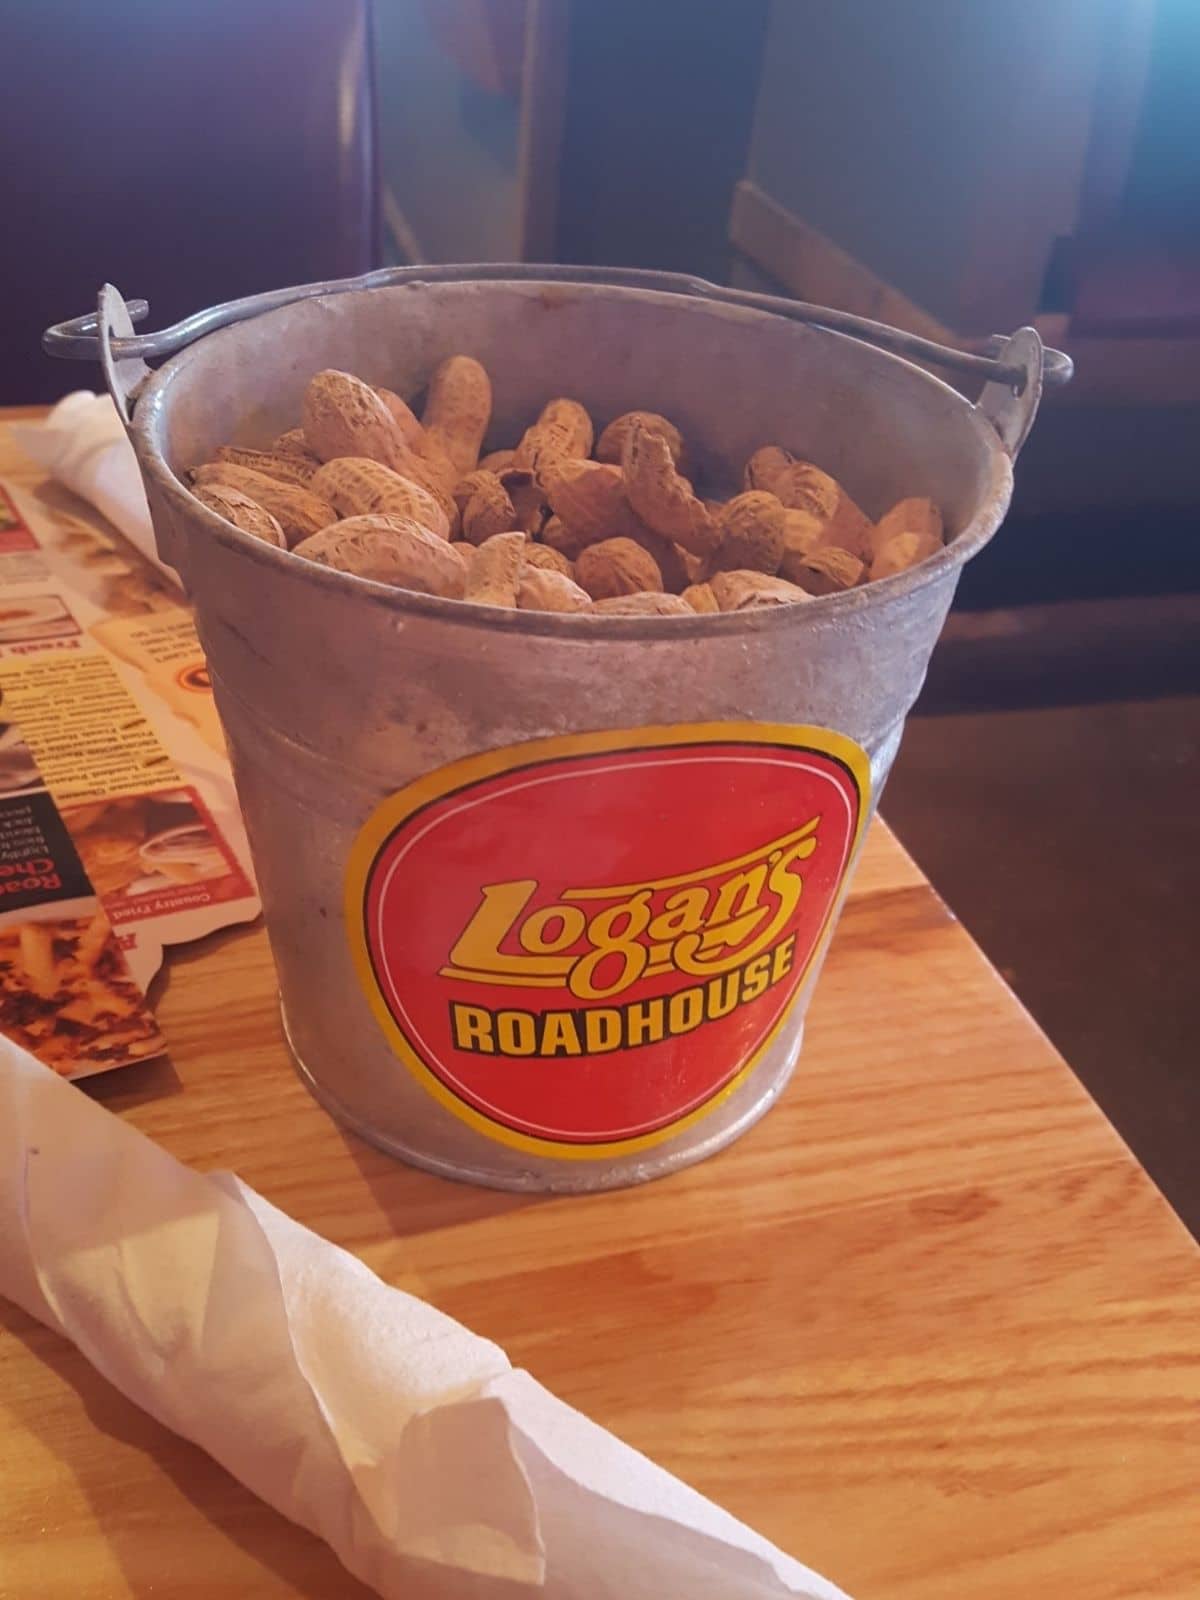 A tin can of peanuts at Logan's Roadhouse in Raleigh, NC.